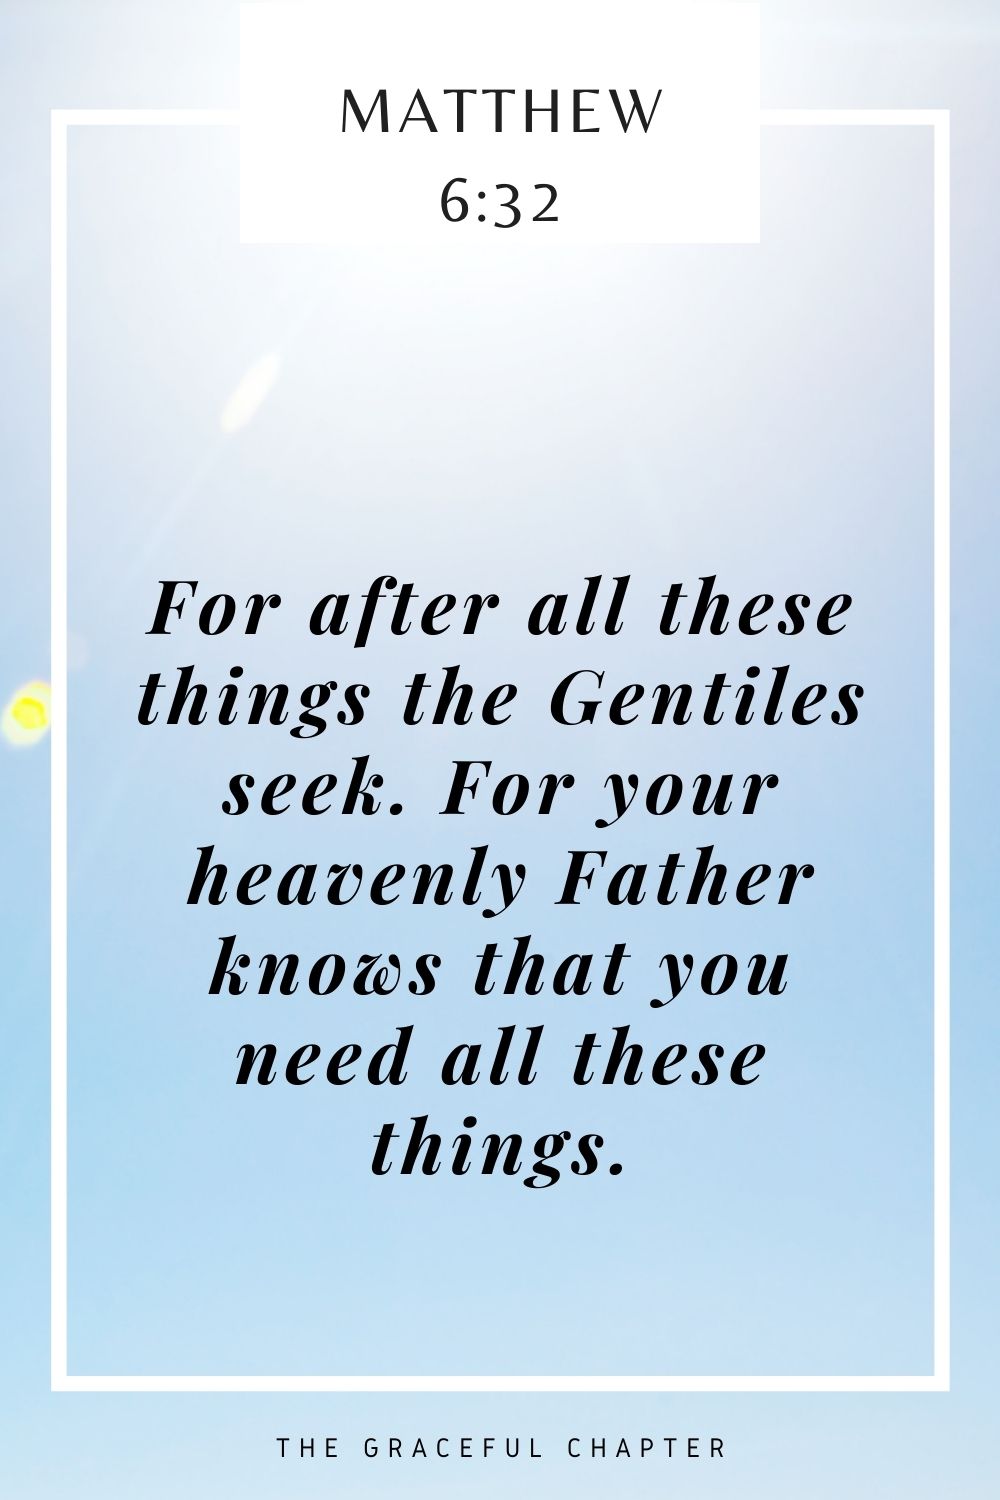 For after all these things the Gentiles seek. For your heavenly Father knows that you need all these things. Matthew 6:32